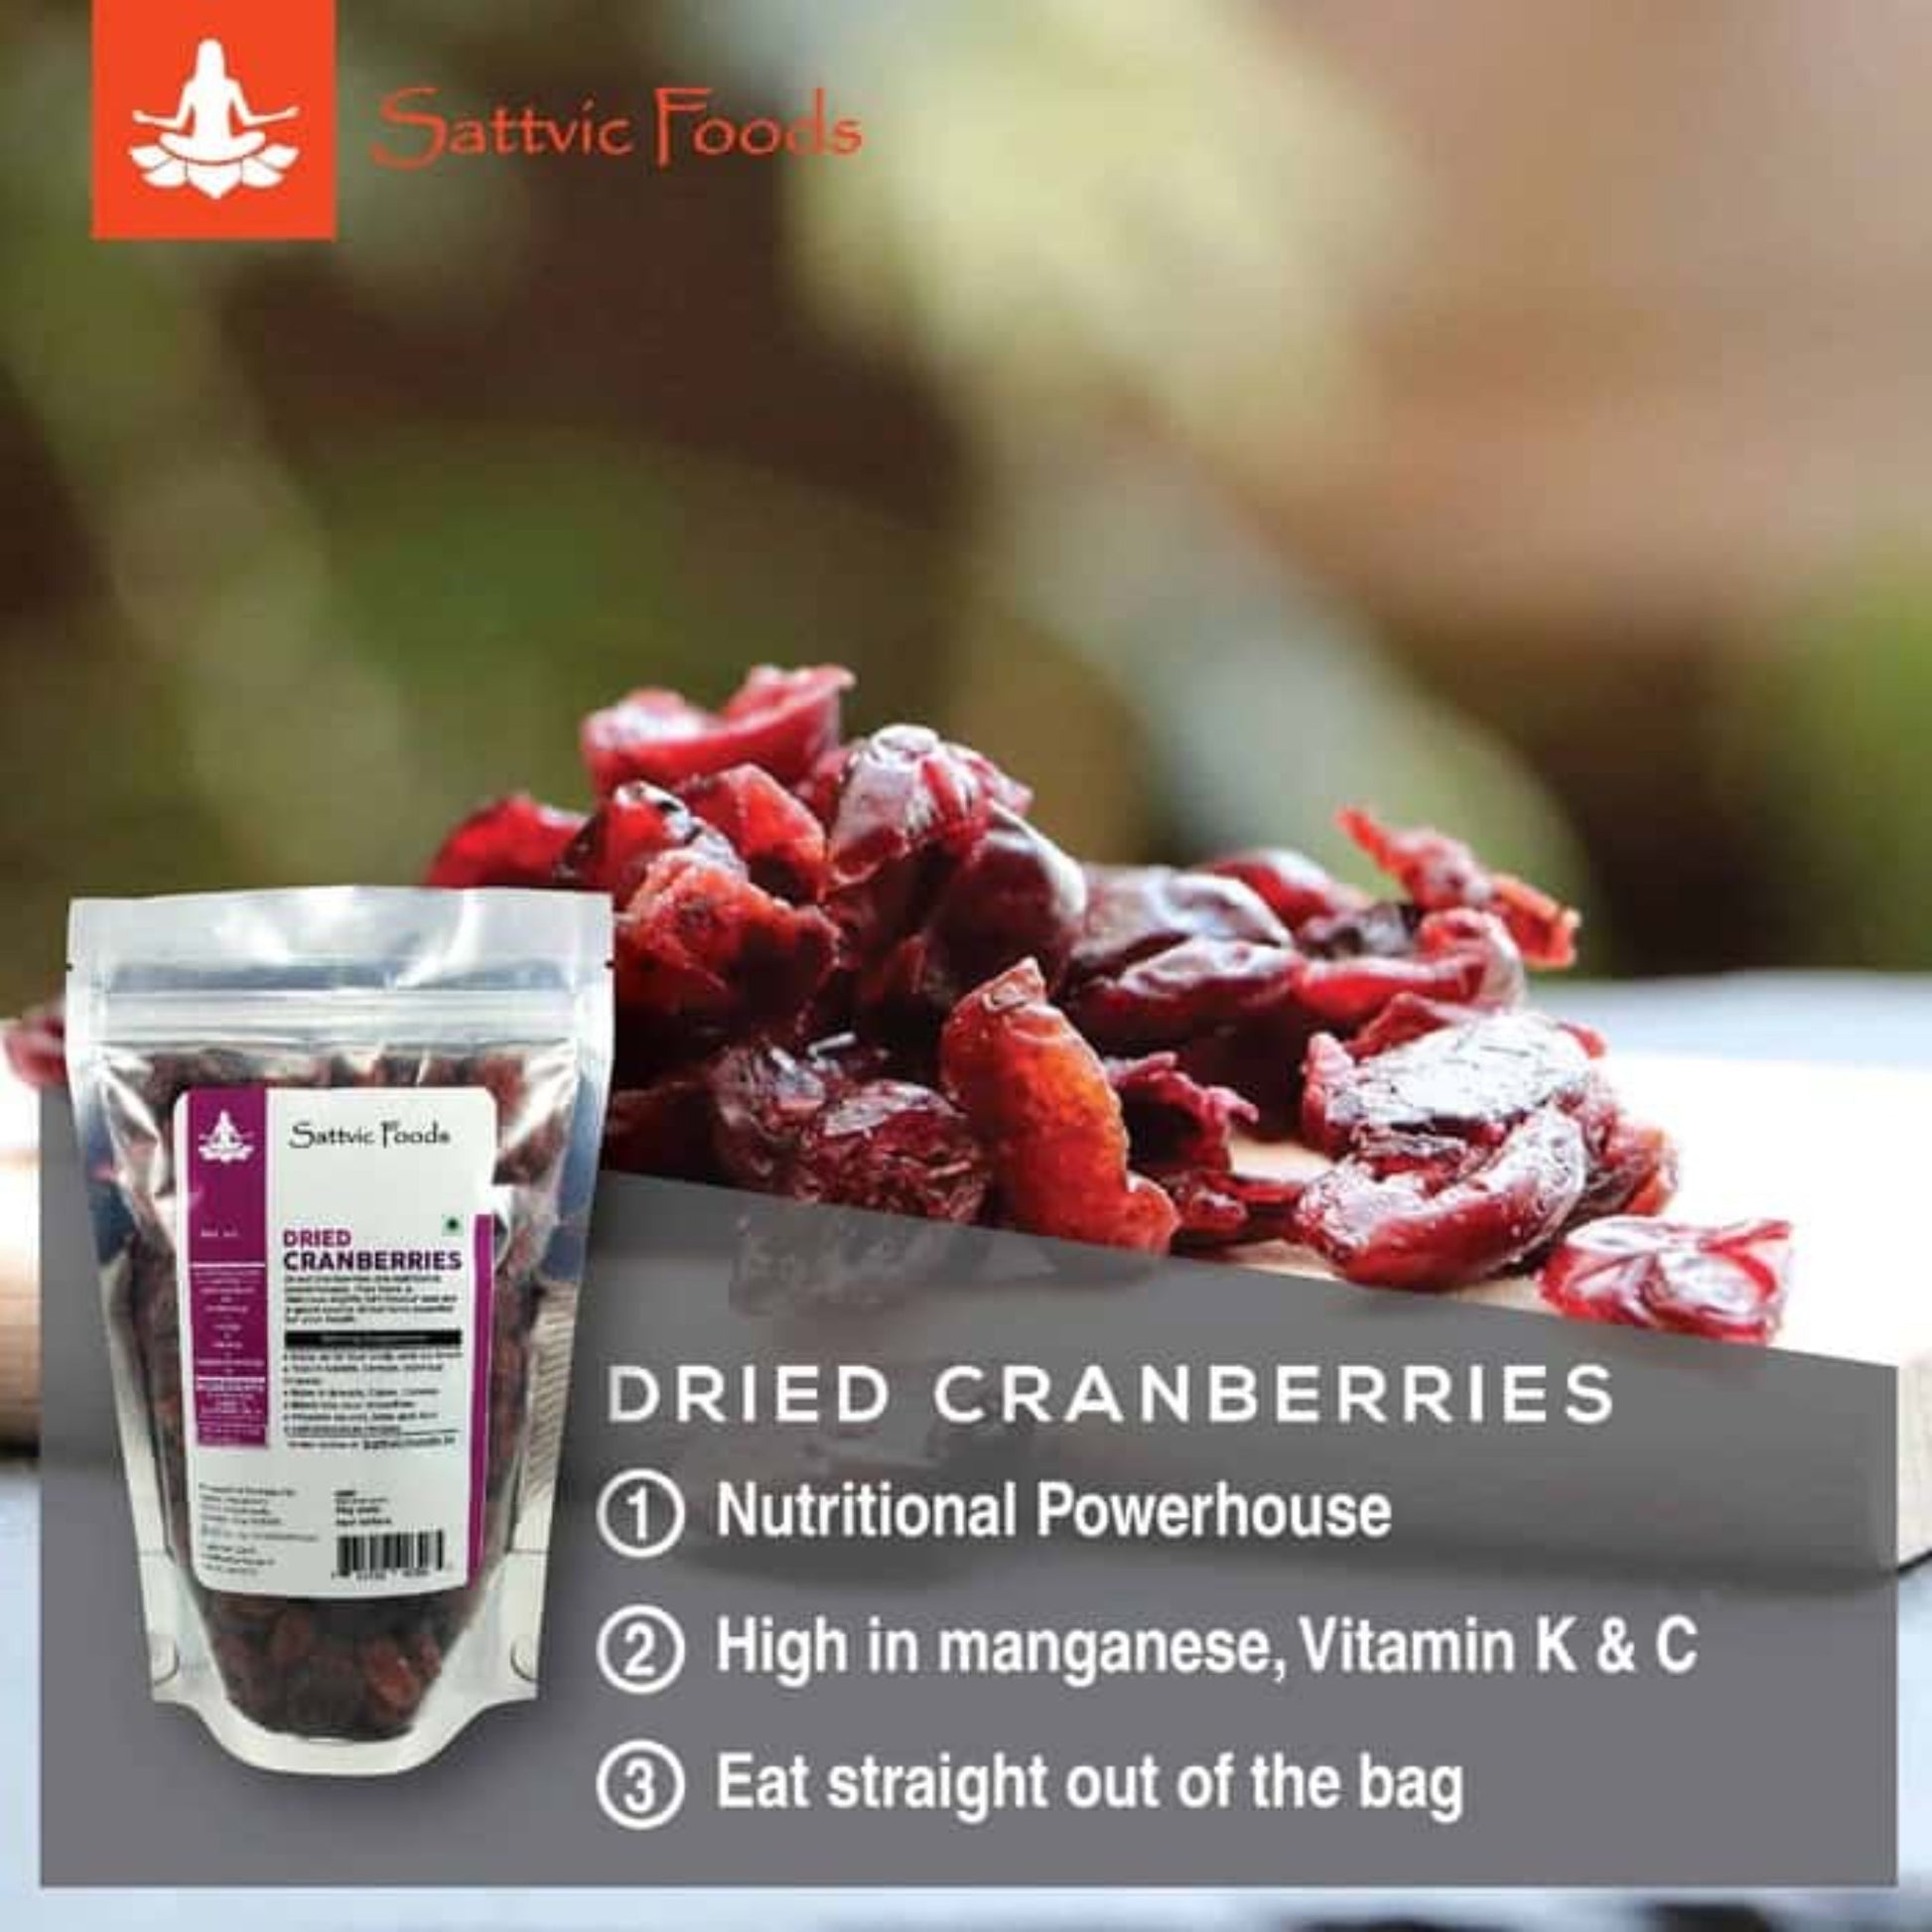 Dried Cranberries (from Canada) Sattvic Foods